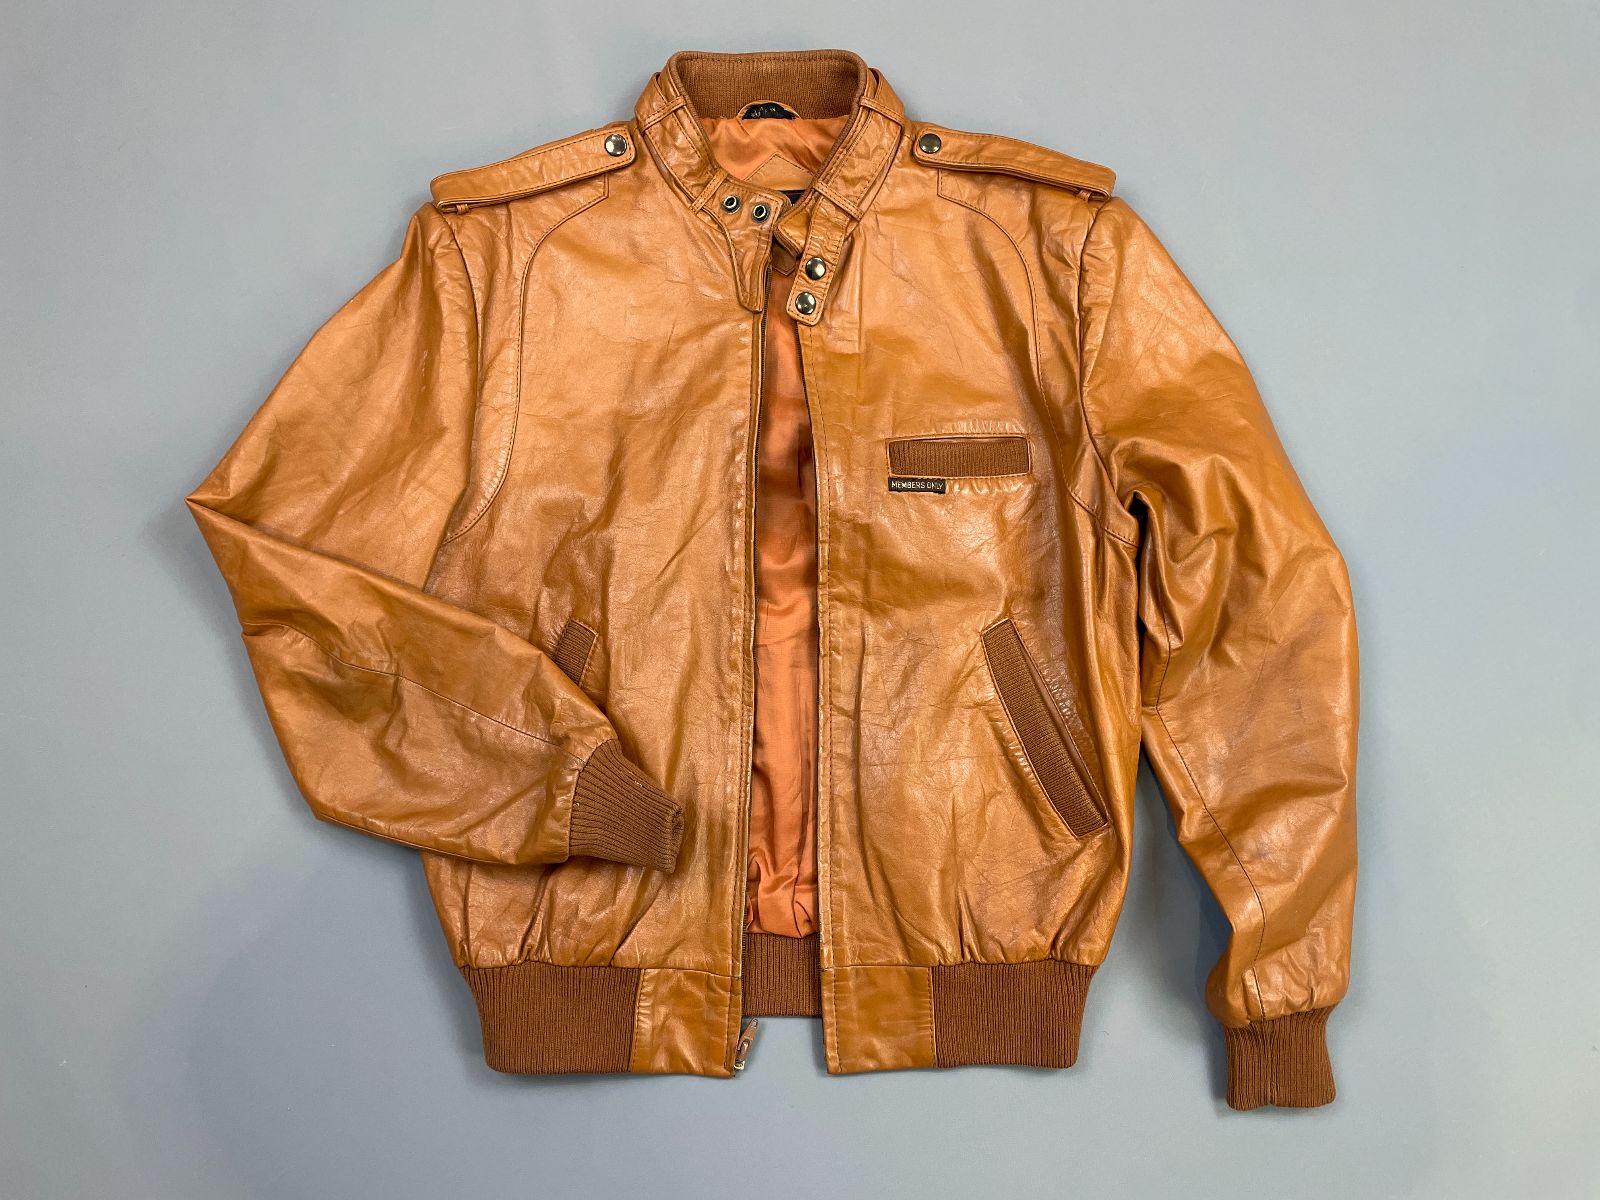 Retro 1970s Leather Members Only Racing Style Jacket | Boardwalk Vintage